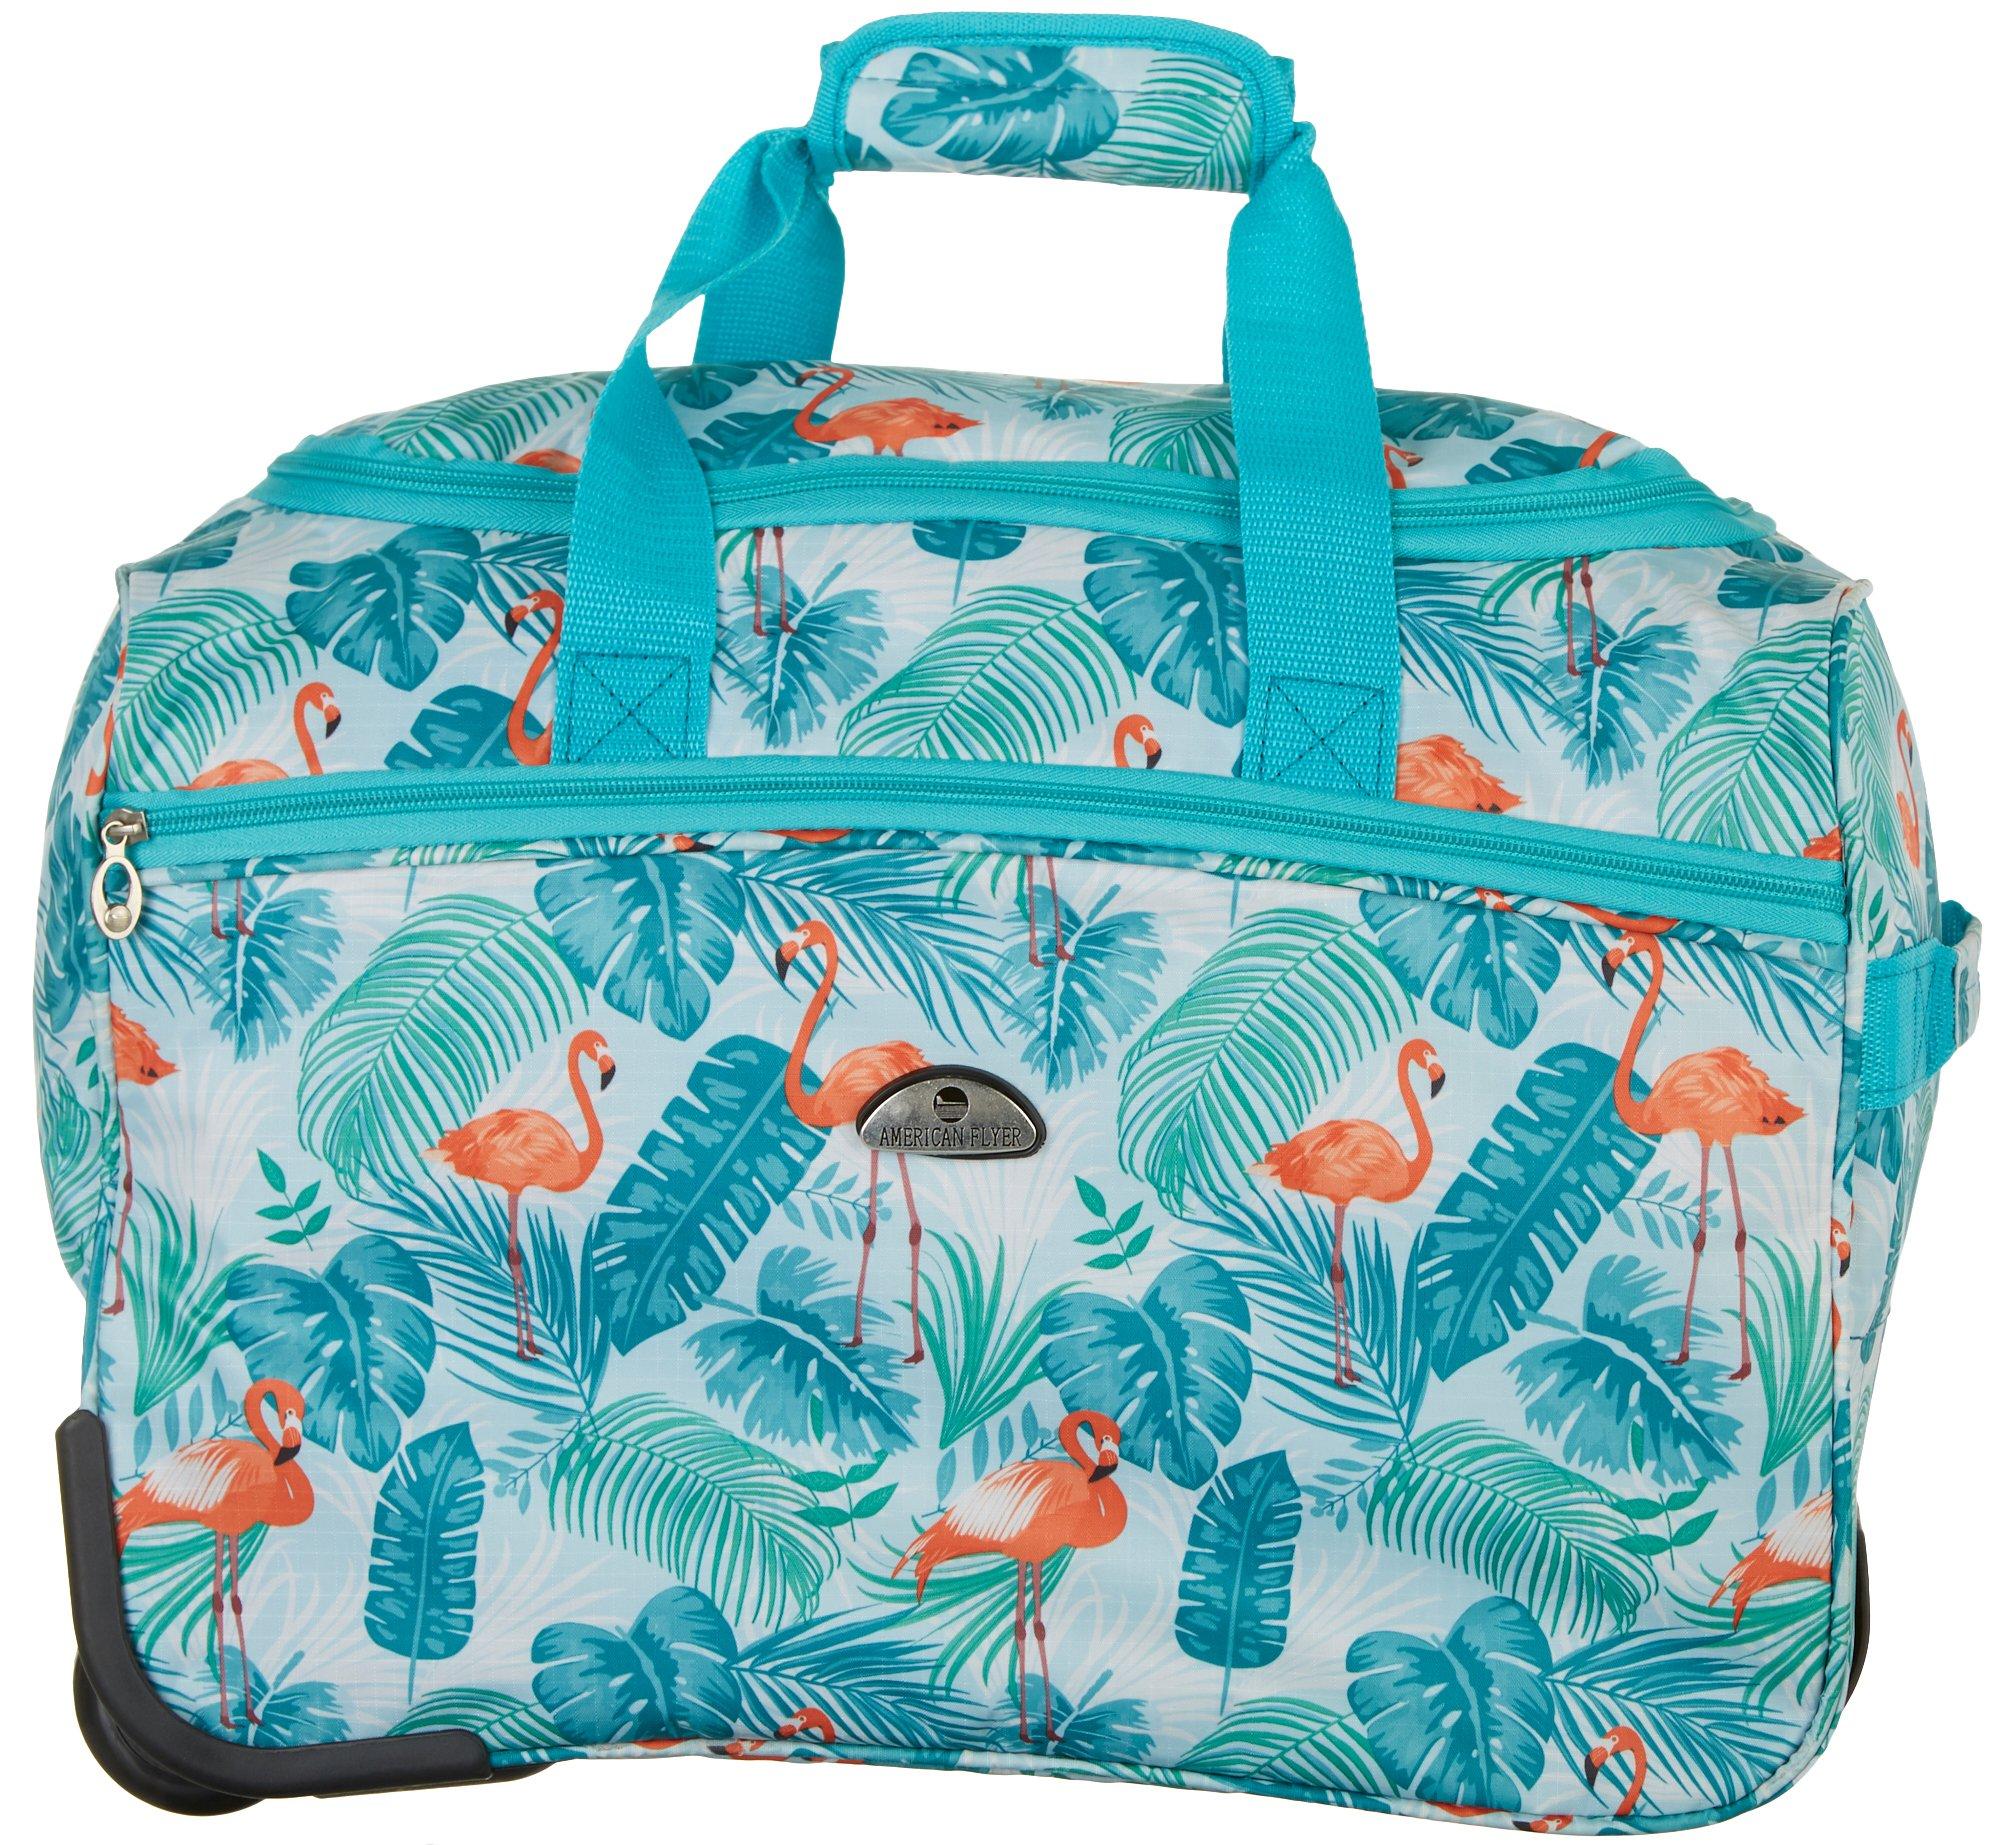 Luggage Sets, Tote Bags & Travel Accessories | Bealls Florida